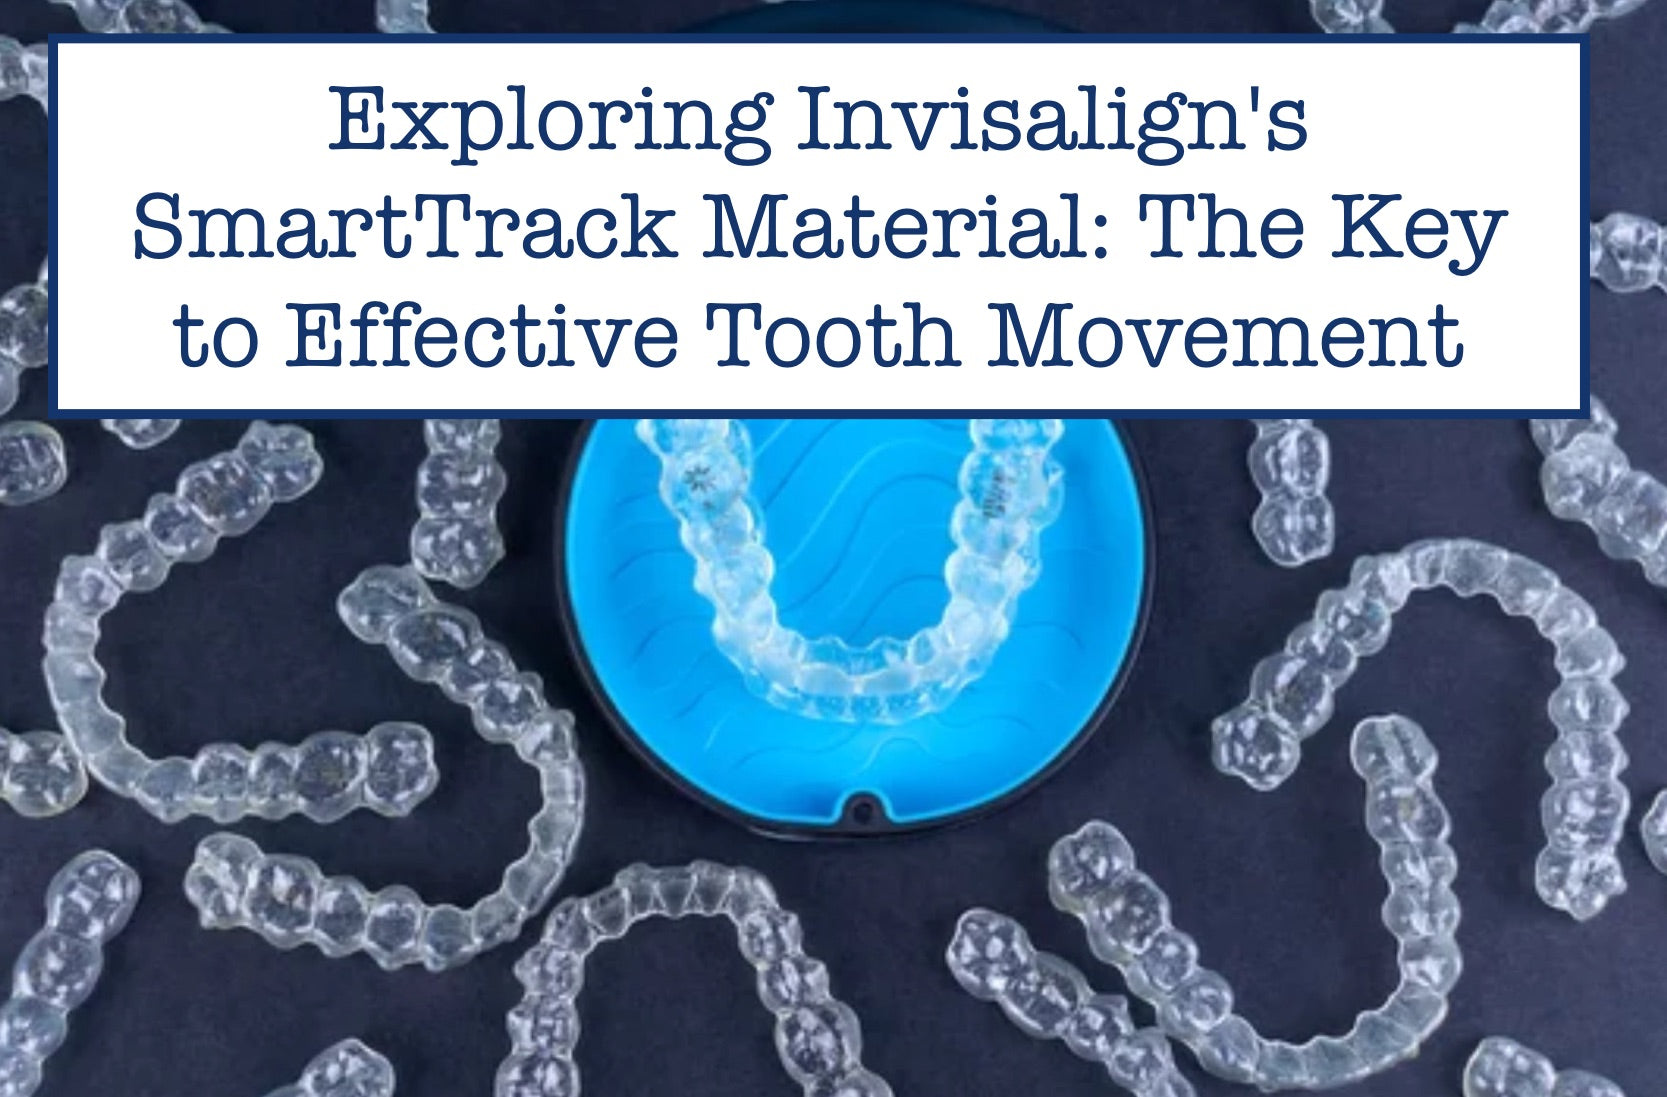 Exploring Invisalign's SmartTrack Material: The Key to Effective Tooth Movement